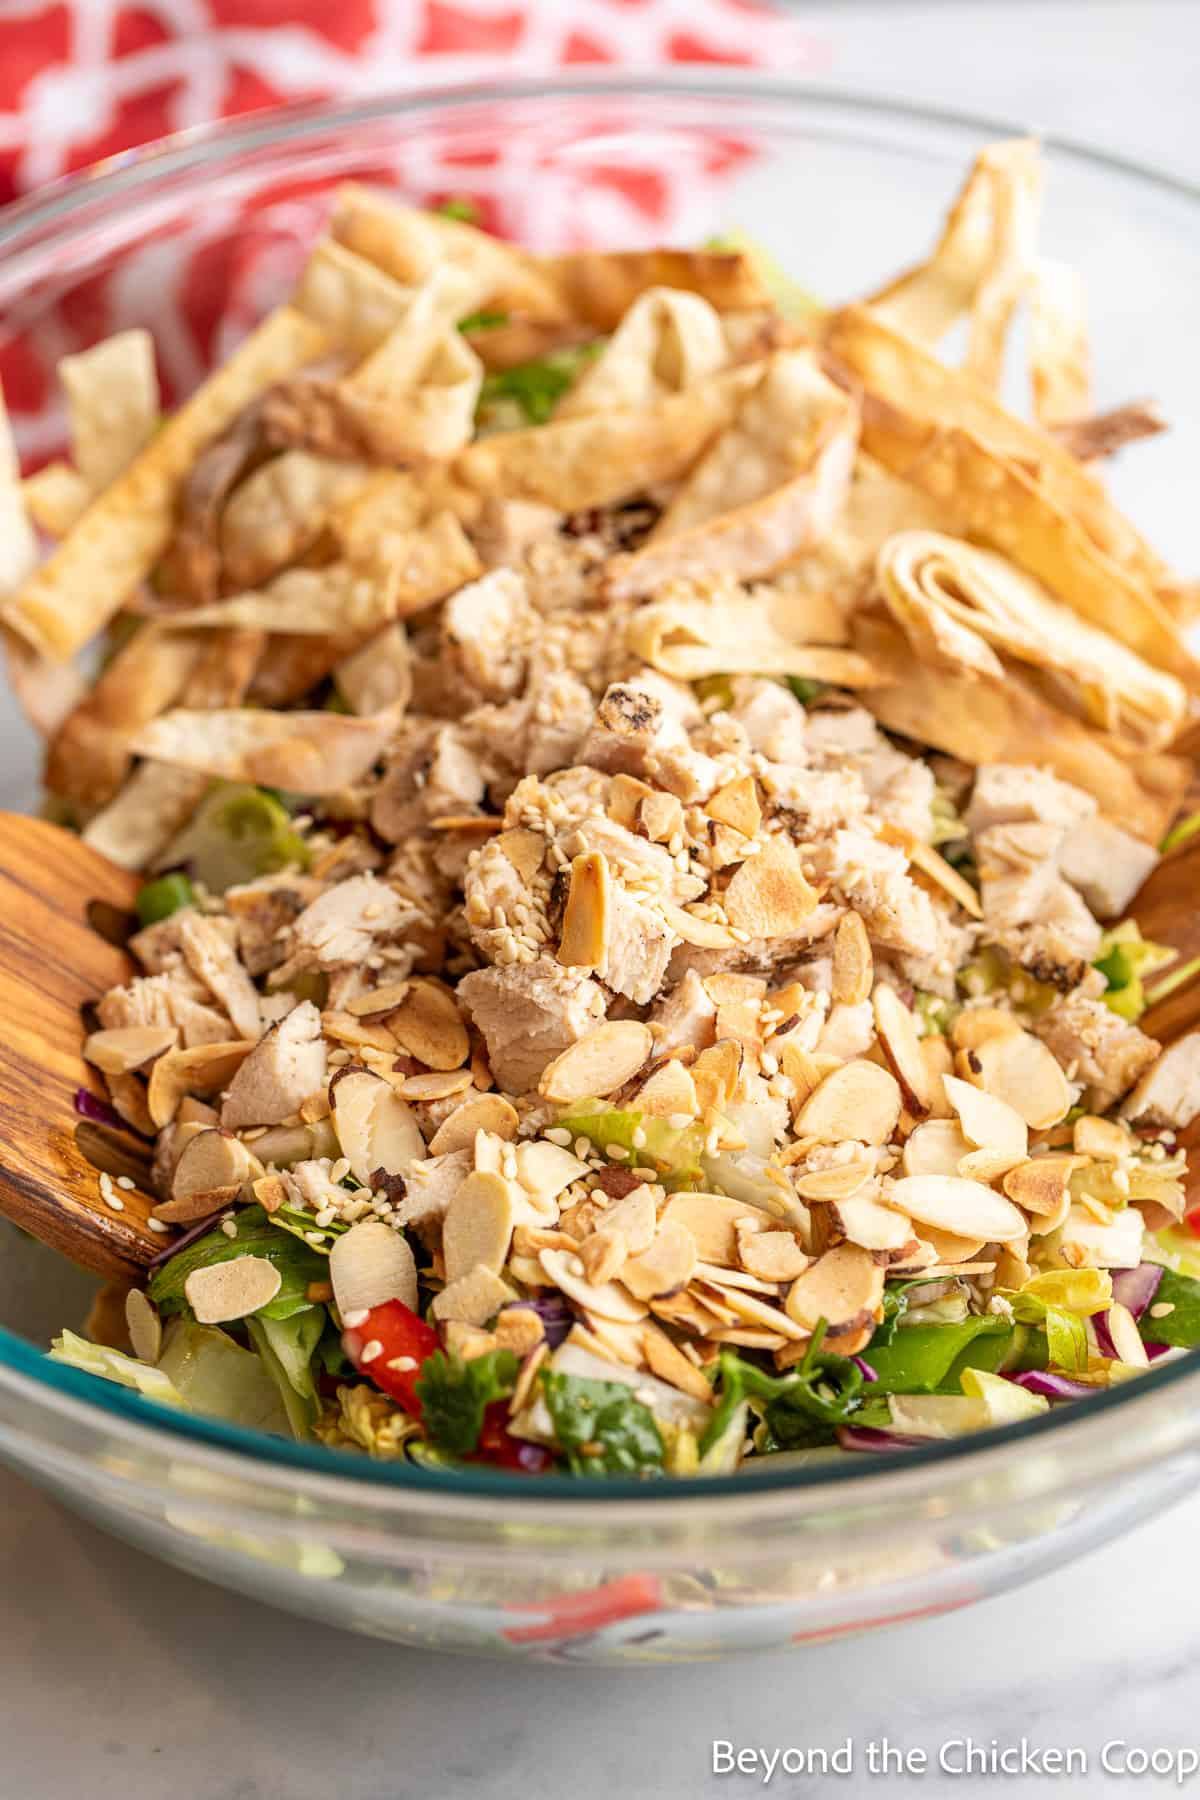 Chopped chicken added to a salad. 